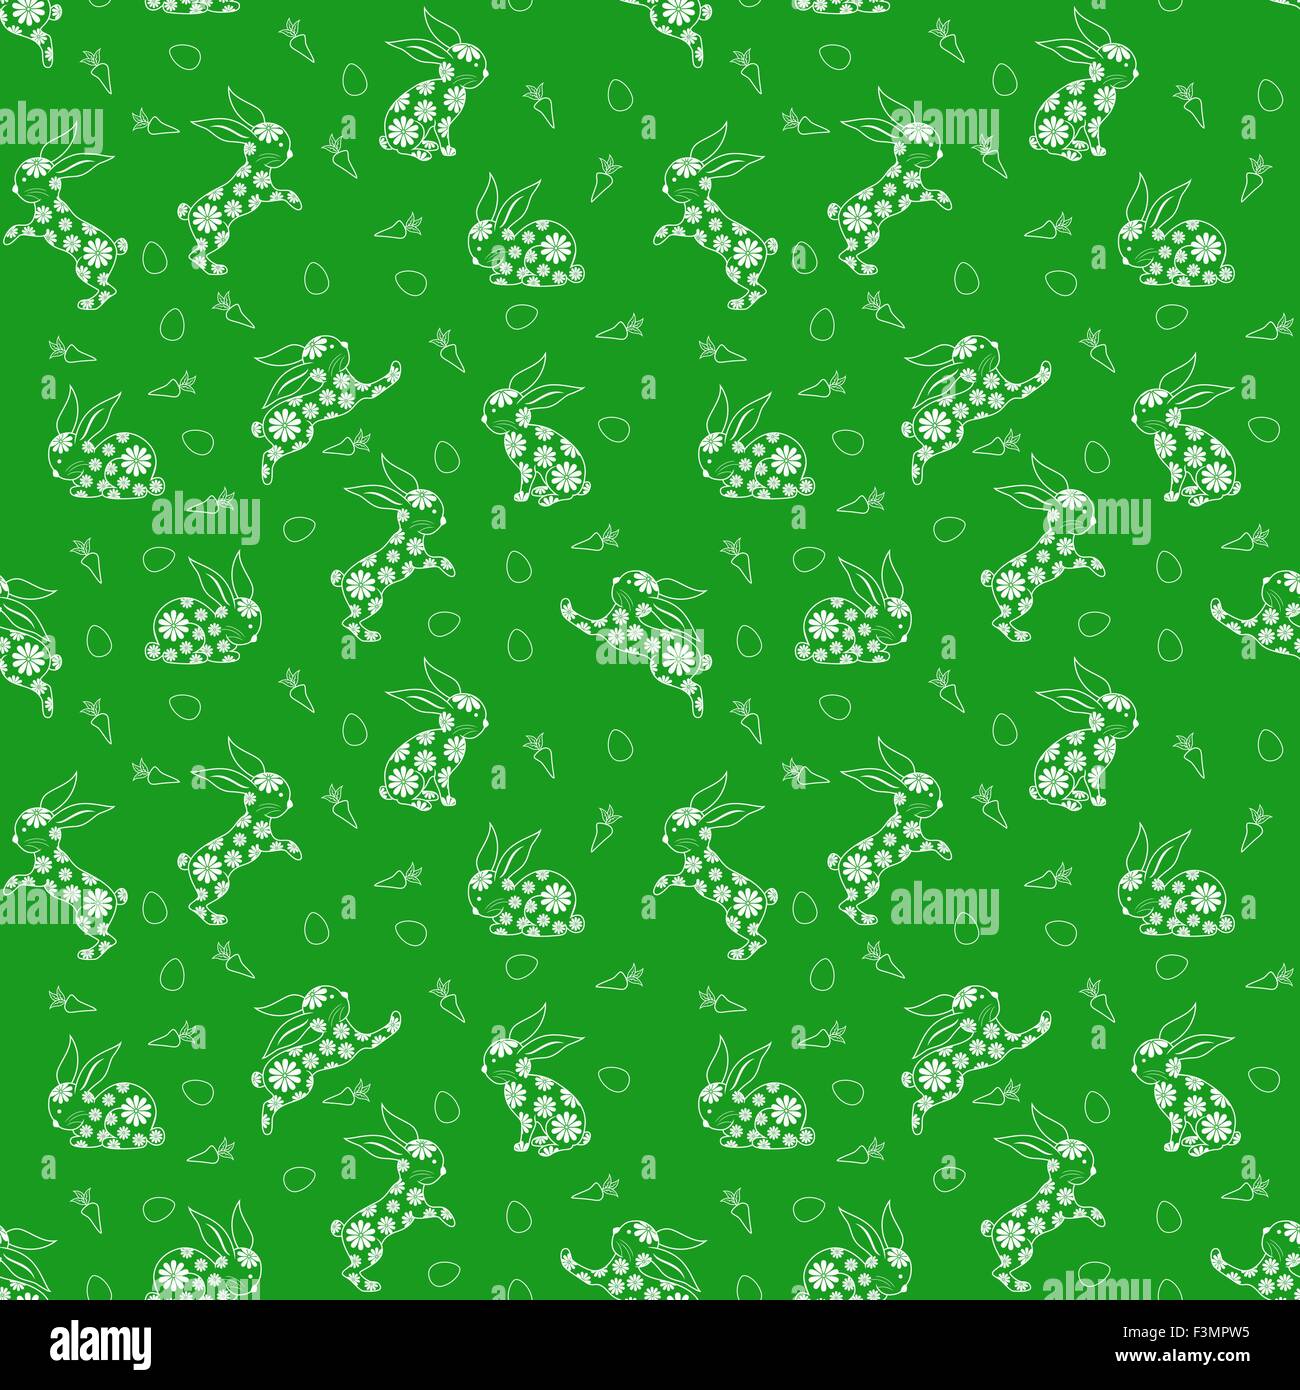 Seamless vector pattern with white Easter rabbits over green background Stock Vector